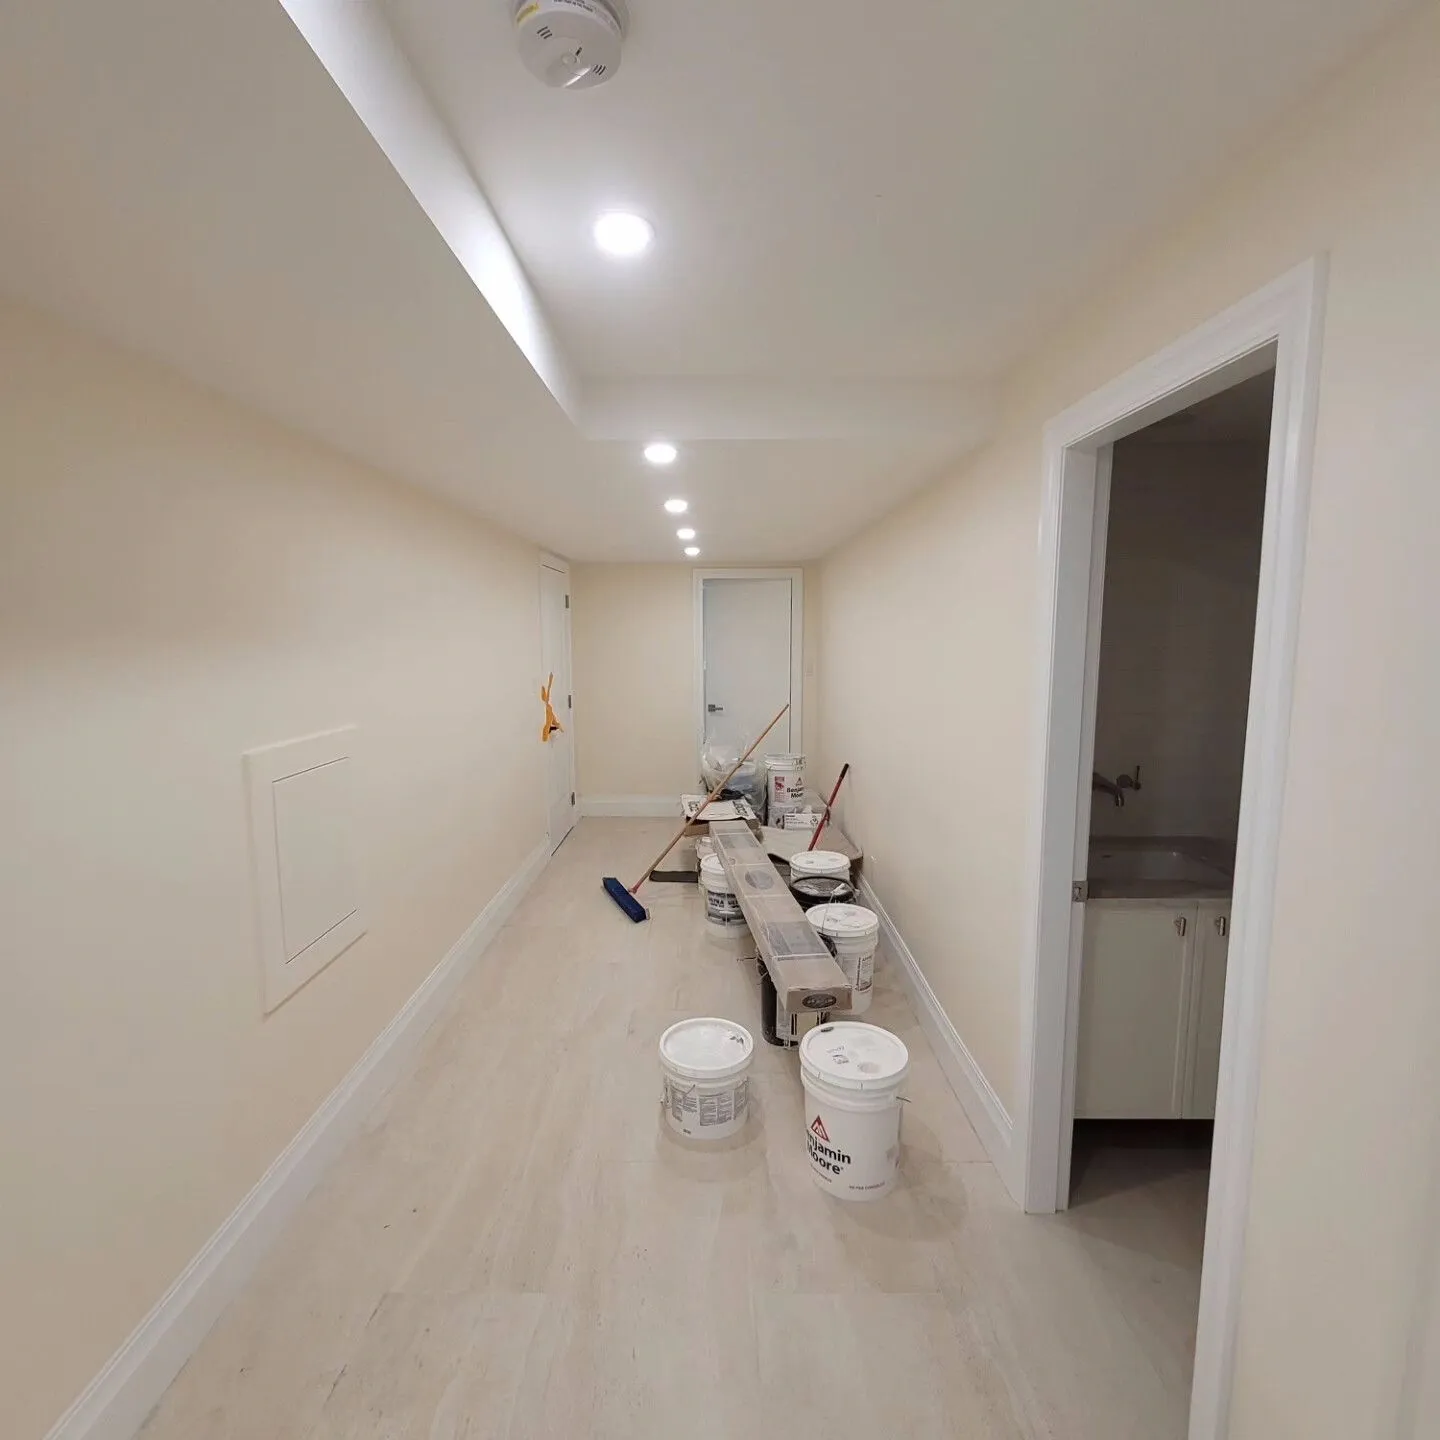 A hallway with white walls and floors.